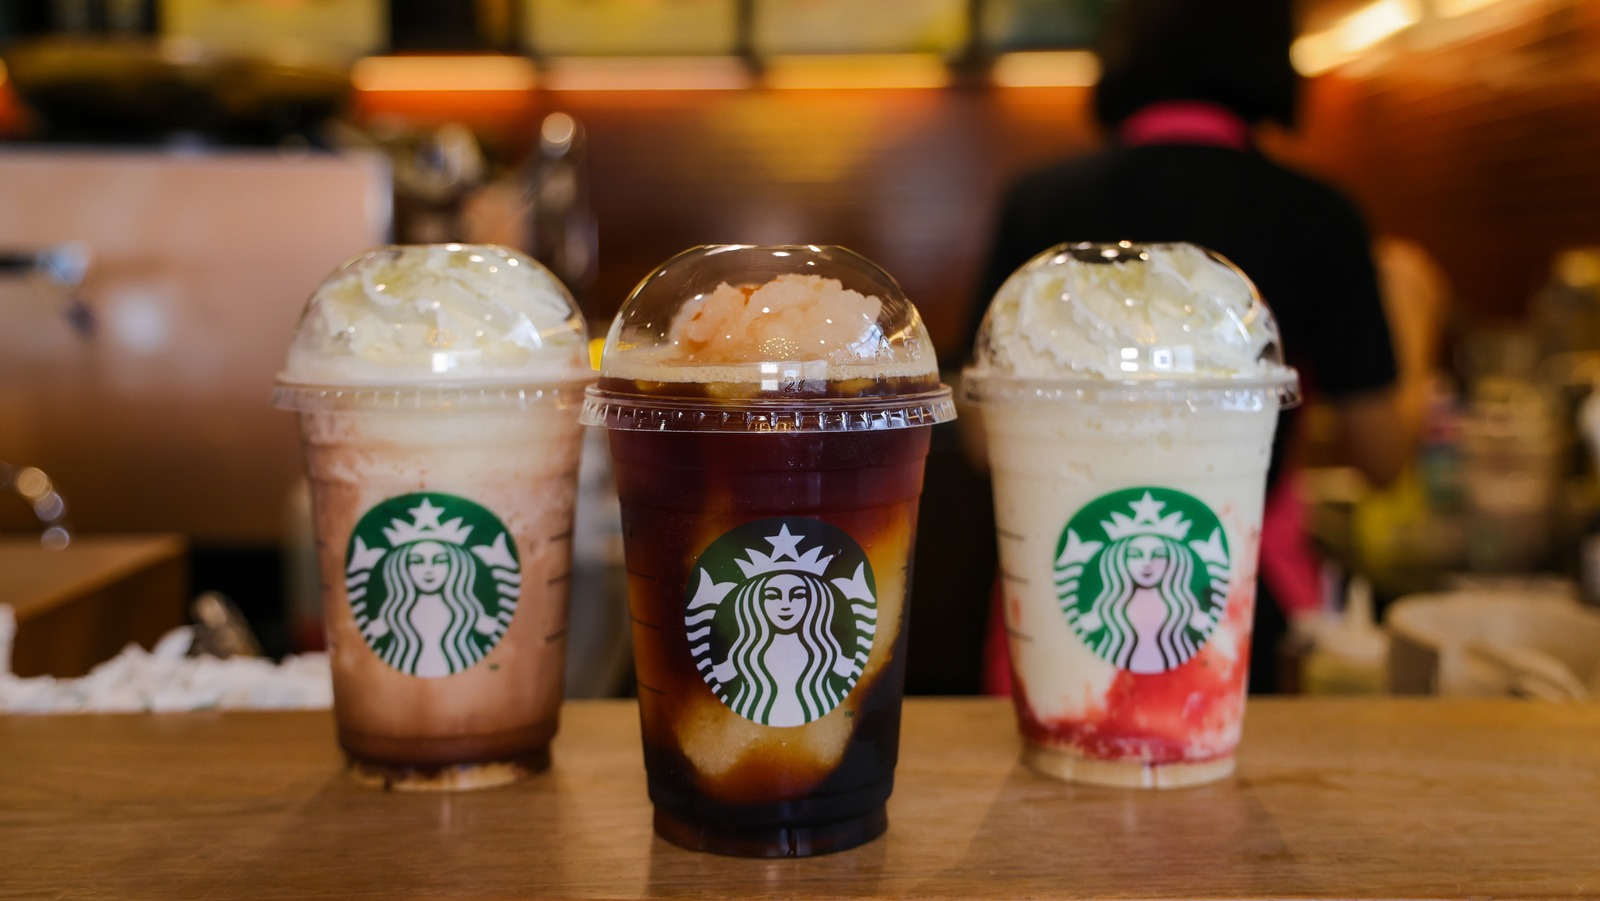 https://www.tastingtable.com/img/gallery/starbucks-introduces-smaller-nugget-ice-to-conserve-water/l-intro-1684514307.jpg